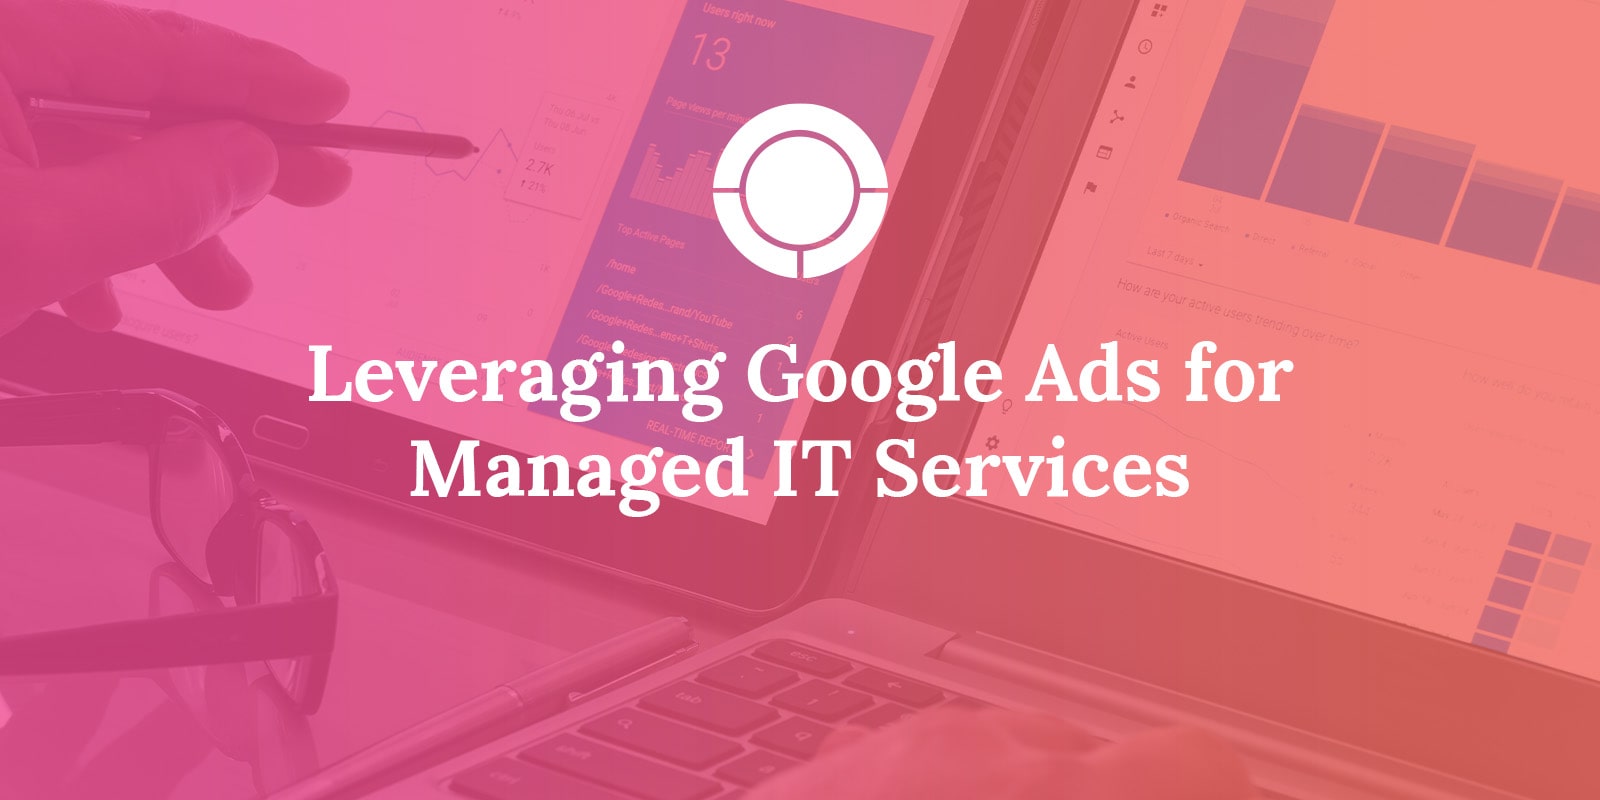 Google Ads for Managed IT Services